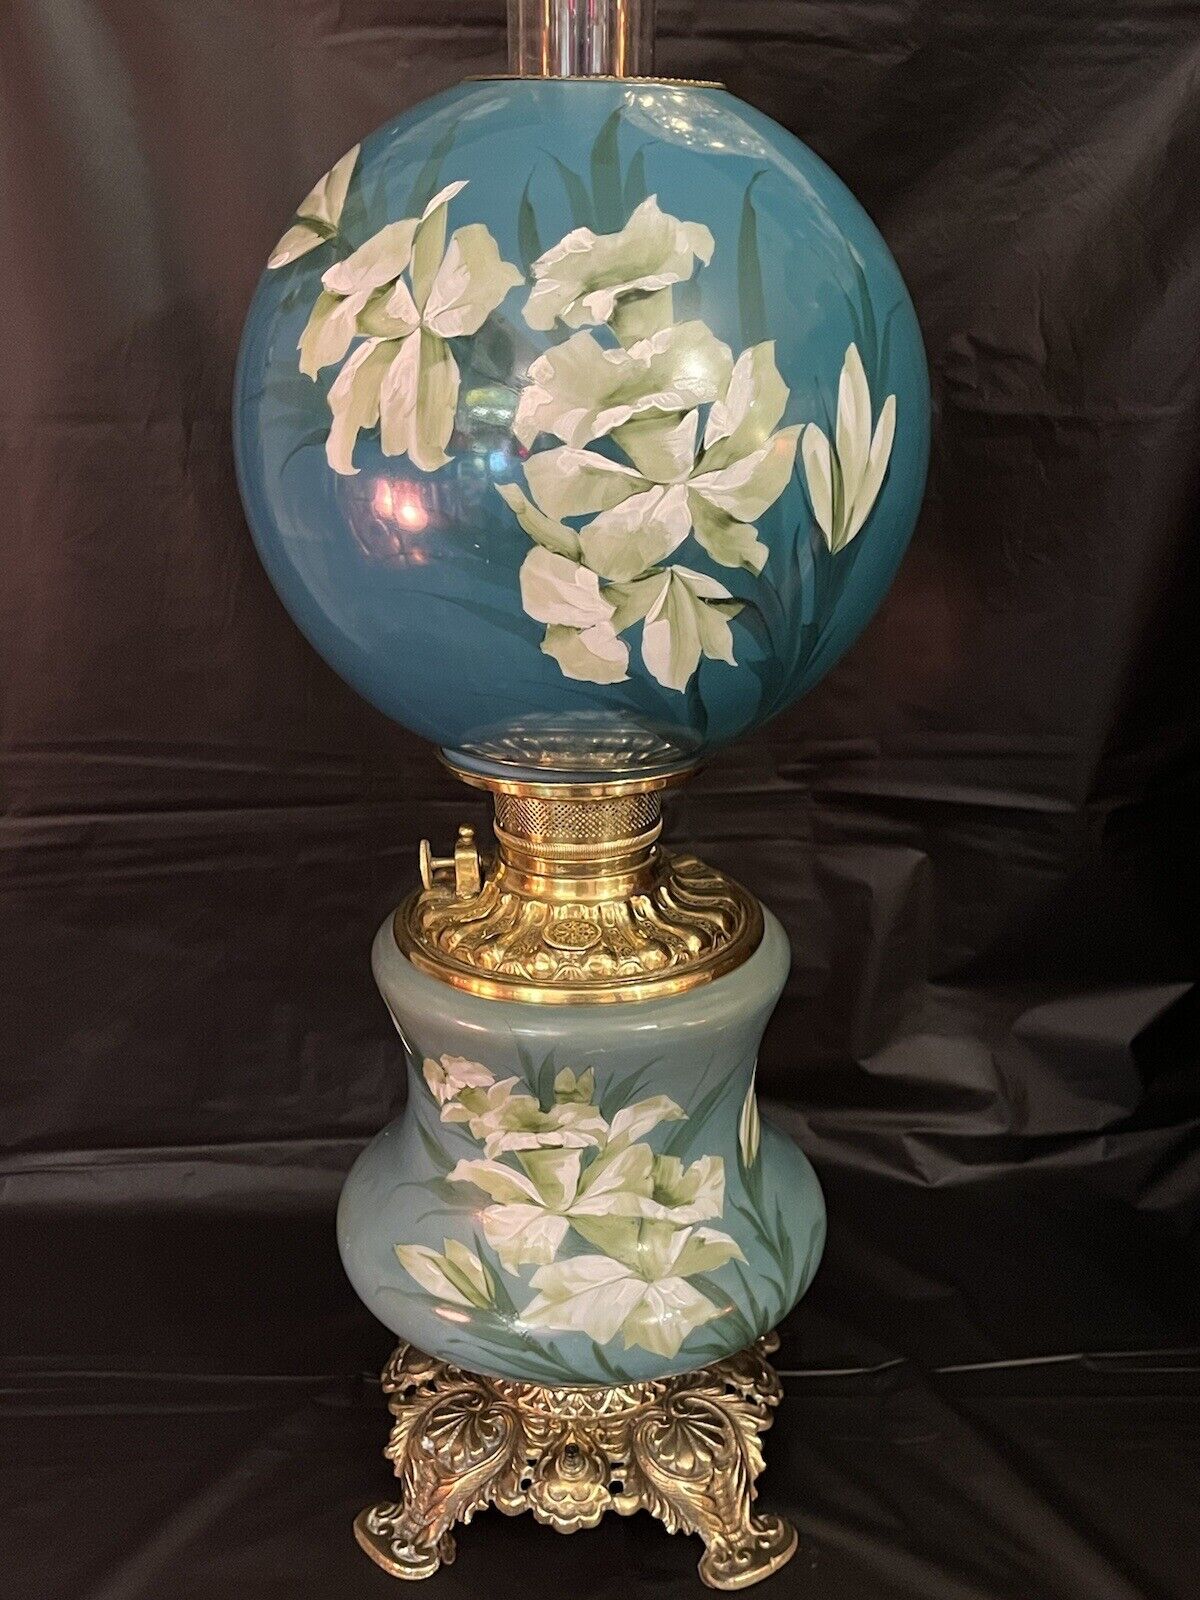 Antique Victorian Unusual Polished Electrified Floral Lily Oil Parlor GWTW Lamp